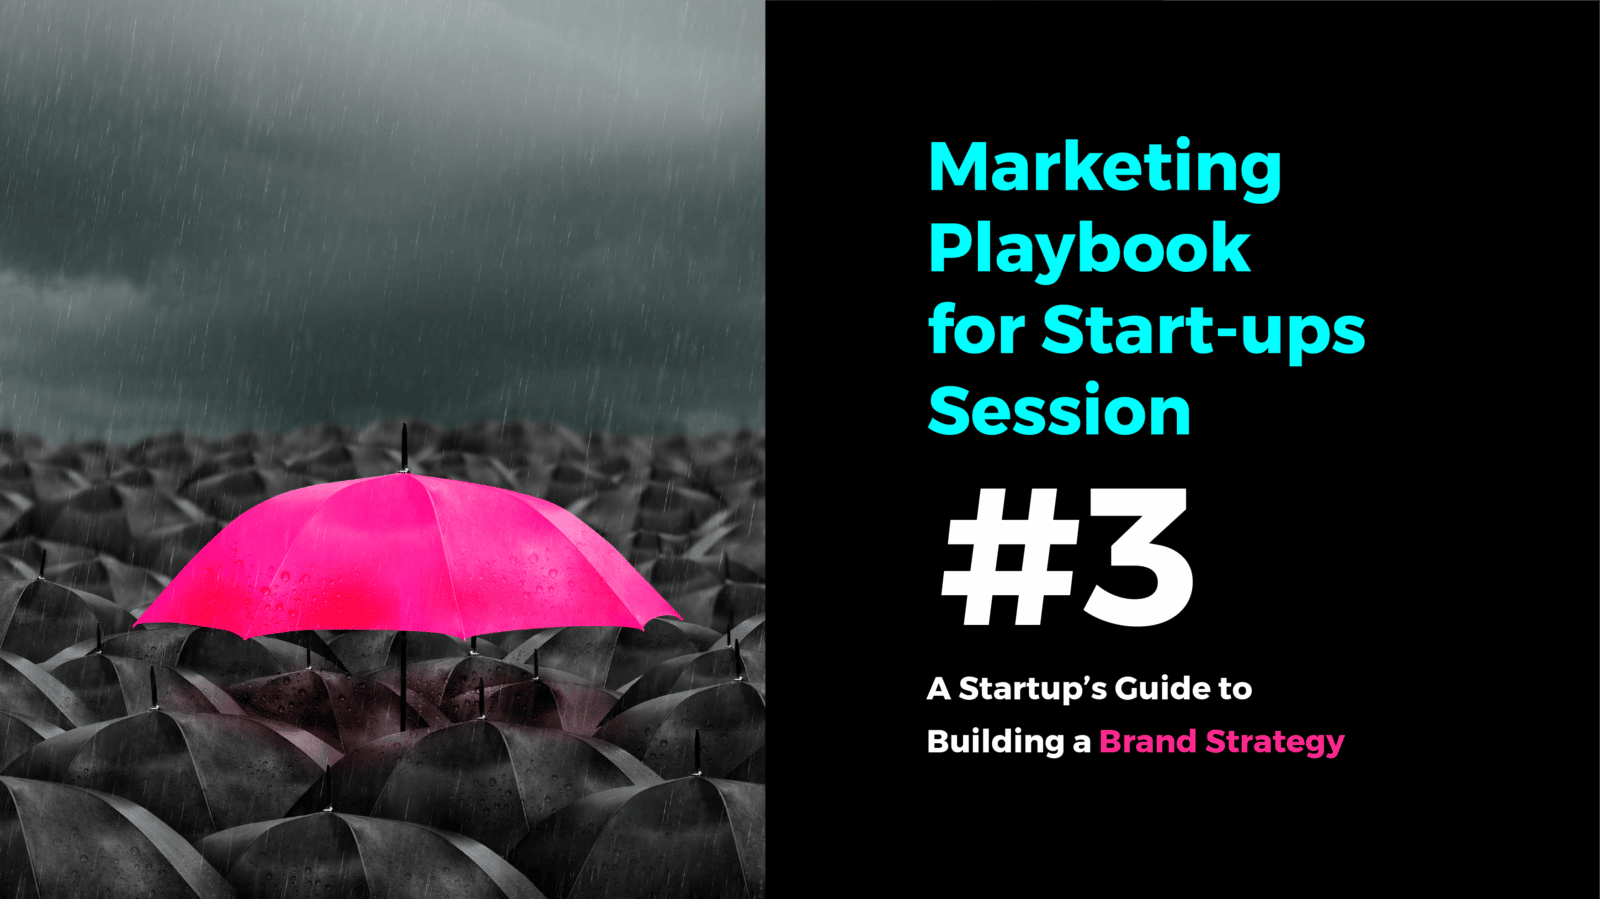 Marketing Playbook for Start-ups Session #3 – A Start-Up’s Guide to Building a Brand Strategy